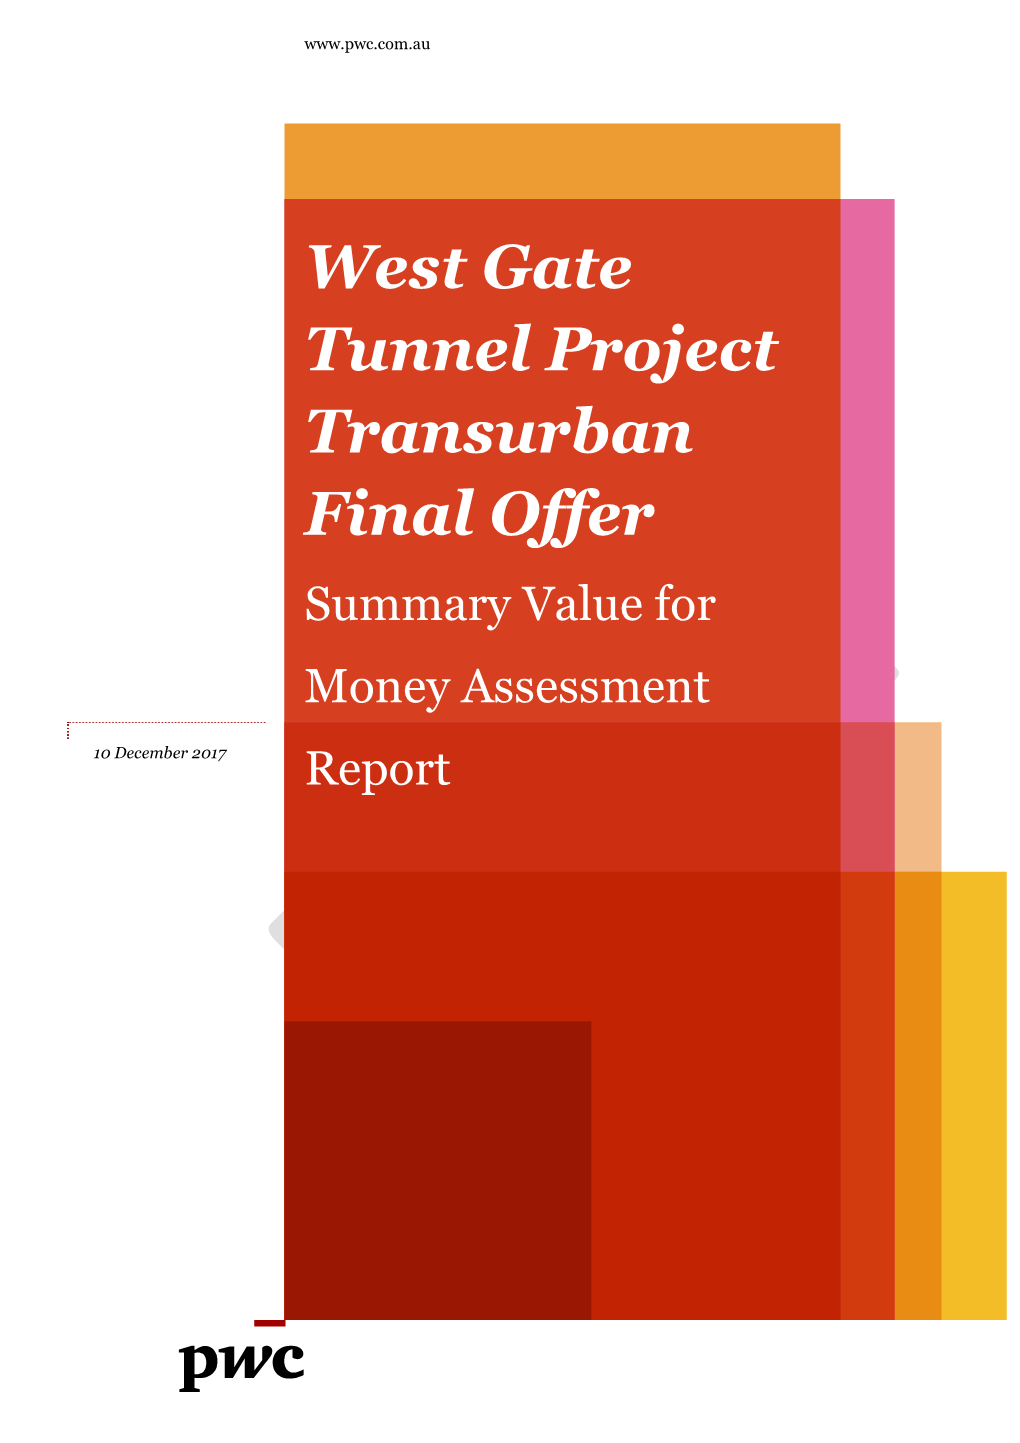 West Gate Tunnel Project Transurban Final Offer Summary Value for Money Assessment 10 December 2017 Report Disclaimer